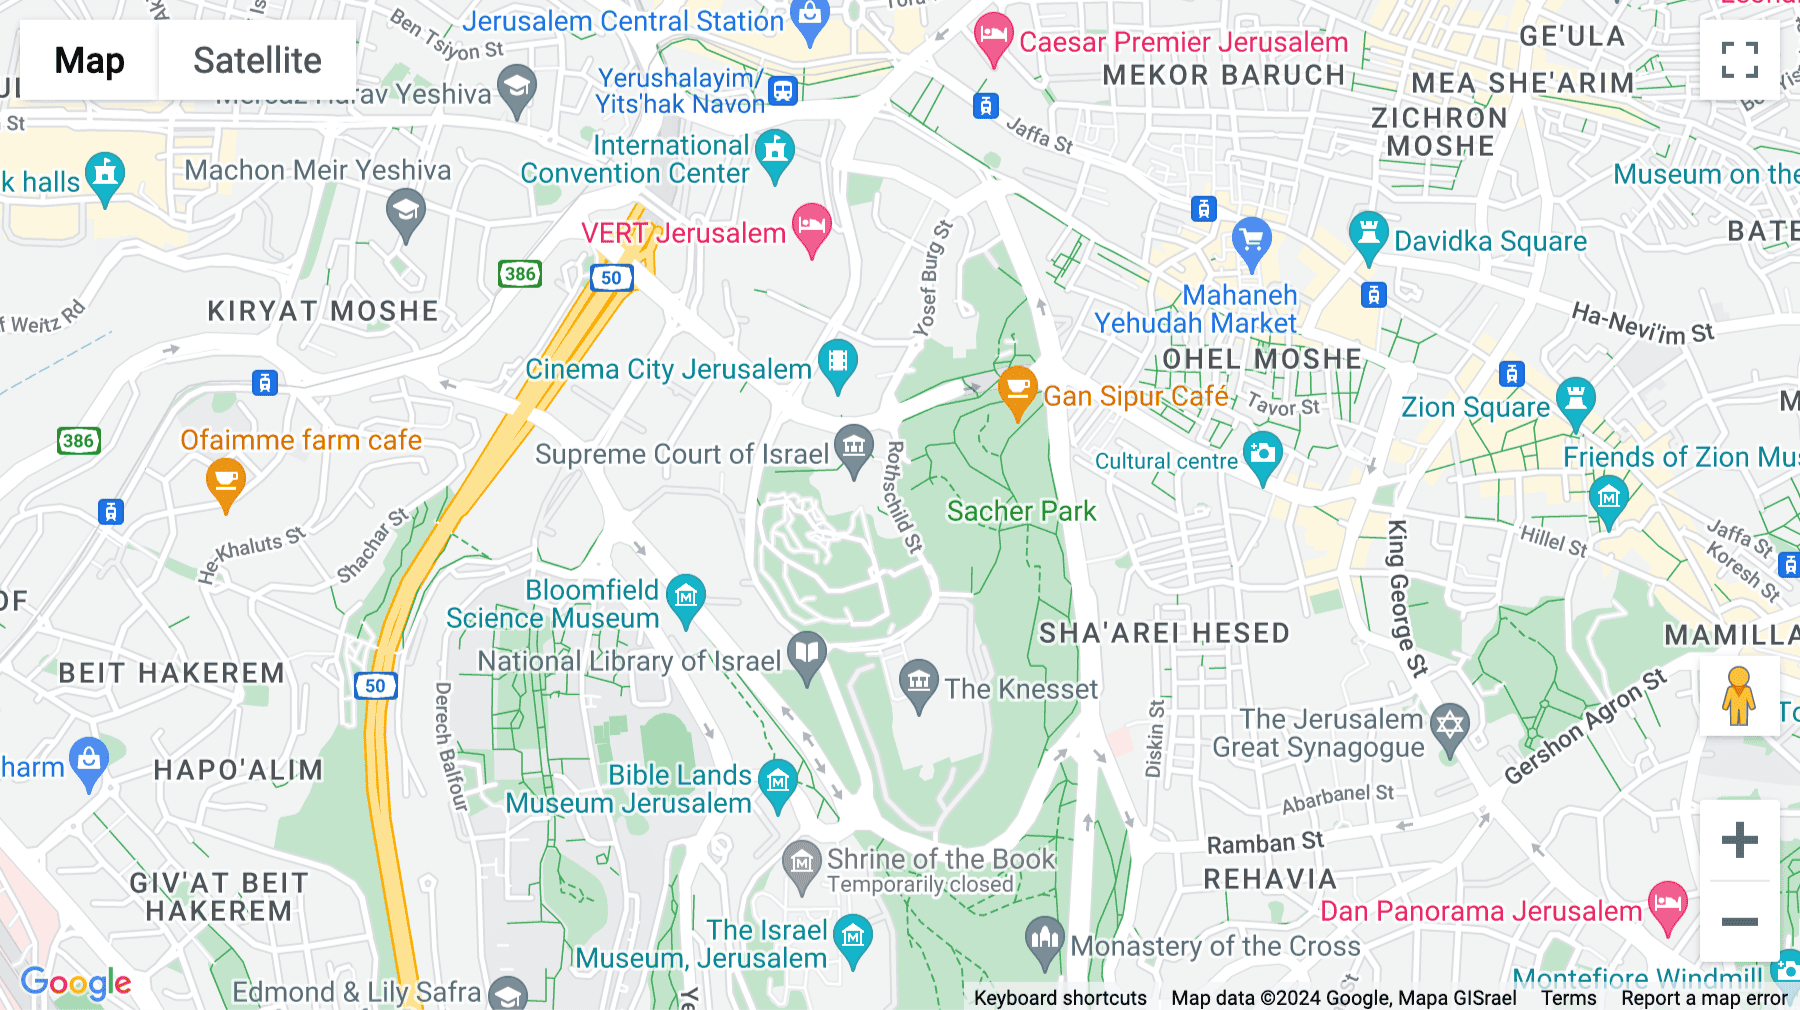 Click for interative map of Rothschild Center, 11th and 12th floors, Rothschild boulevard 22, Tel Aviv